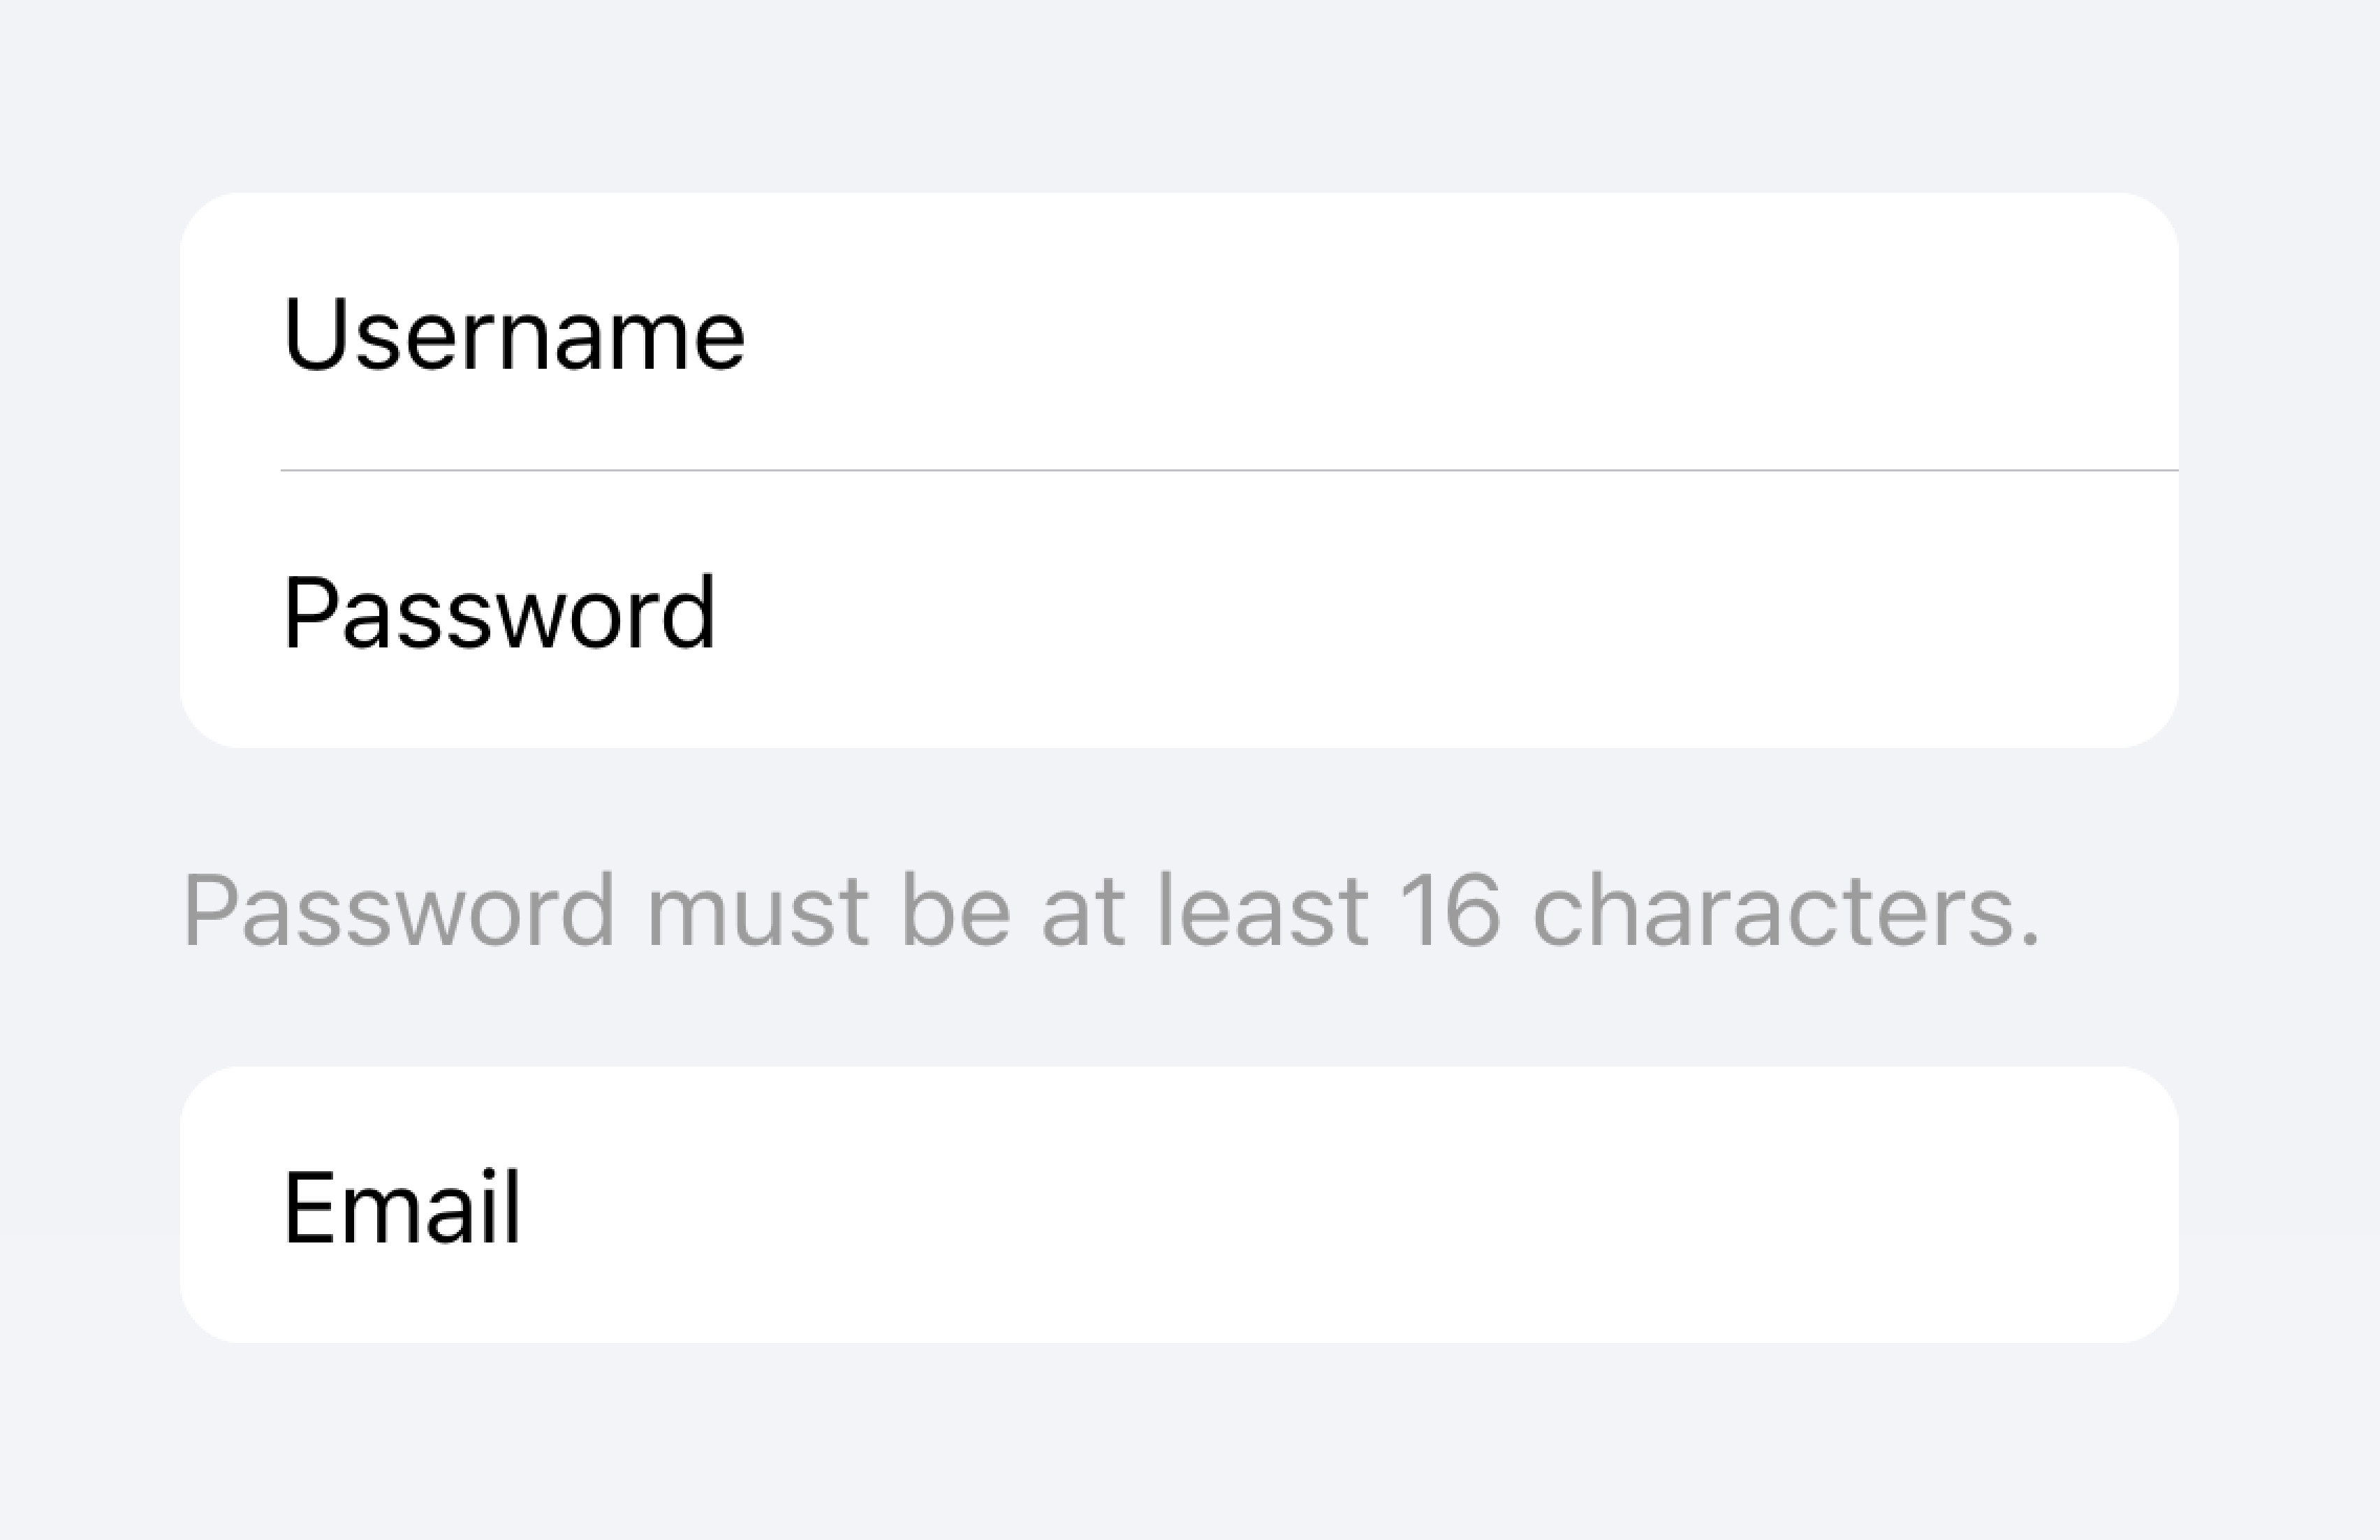 There are two lists of inputs. The first list contains a password input. Below that list contains text that says 'Password must be at least 16 characters'. The second list contains an email input. This second list is separated so the password length requirement text is clearly associated with the password input above.